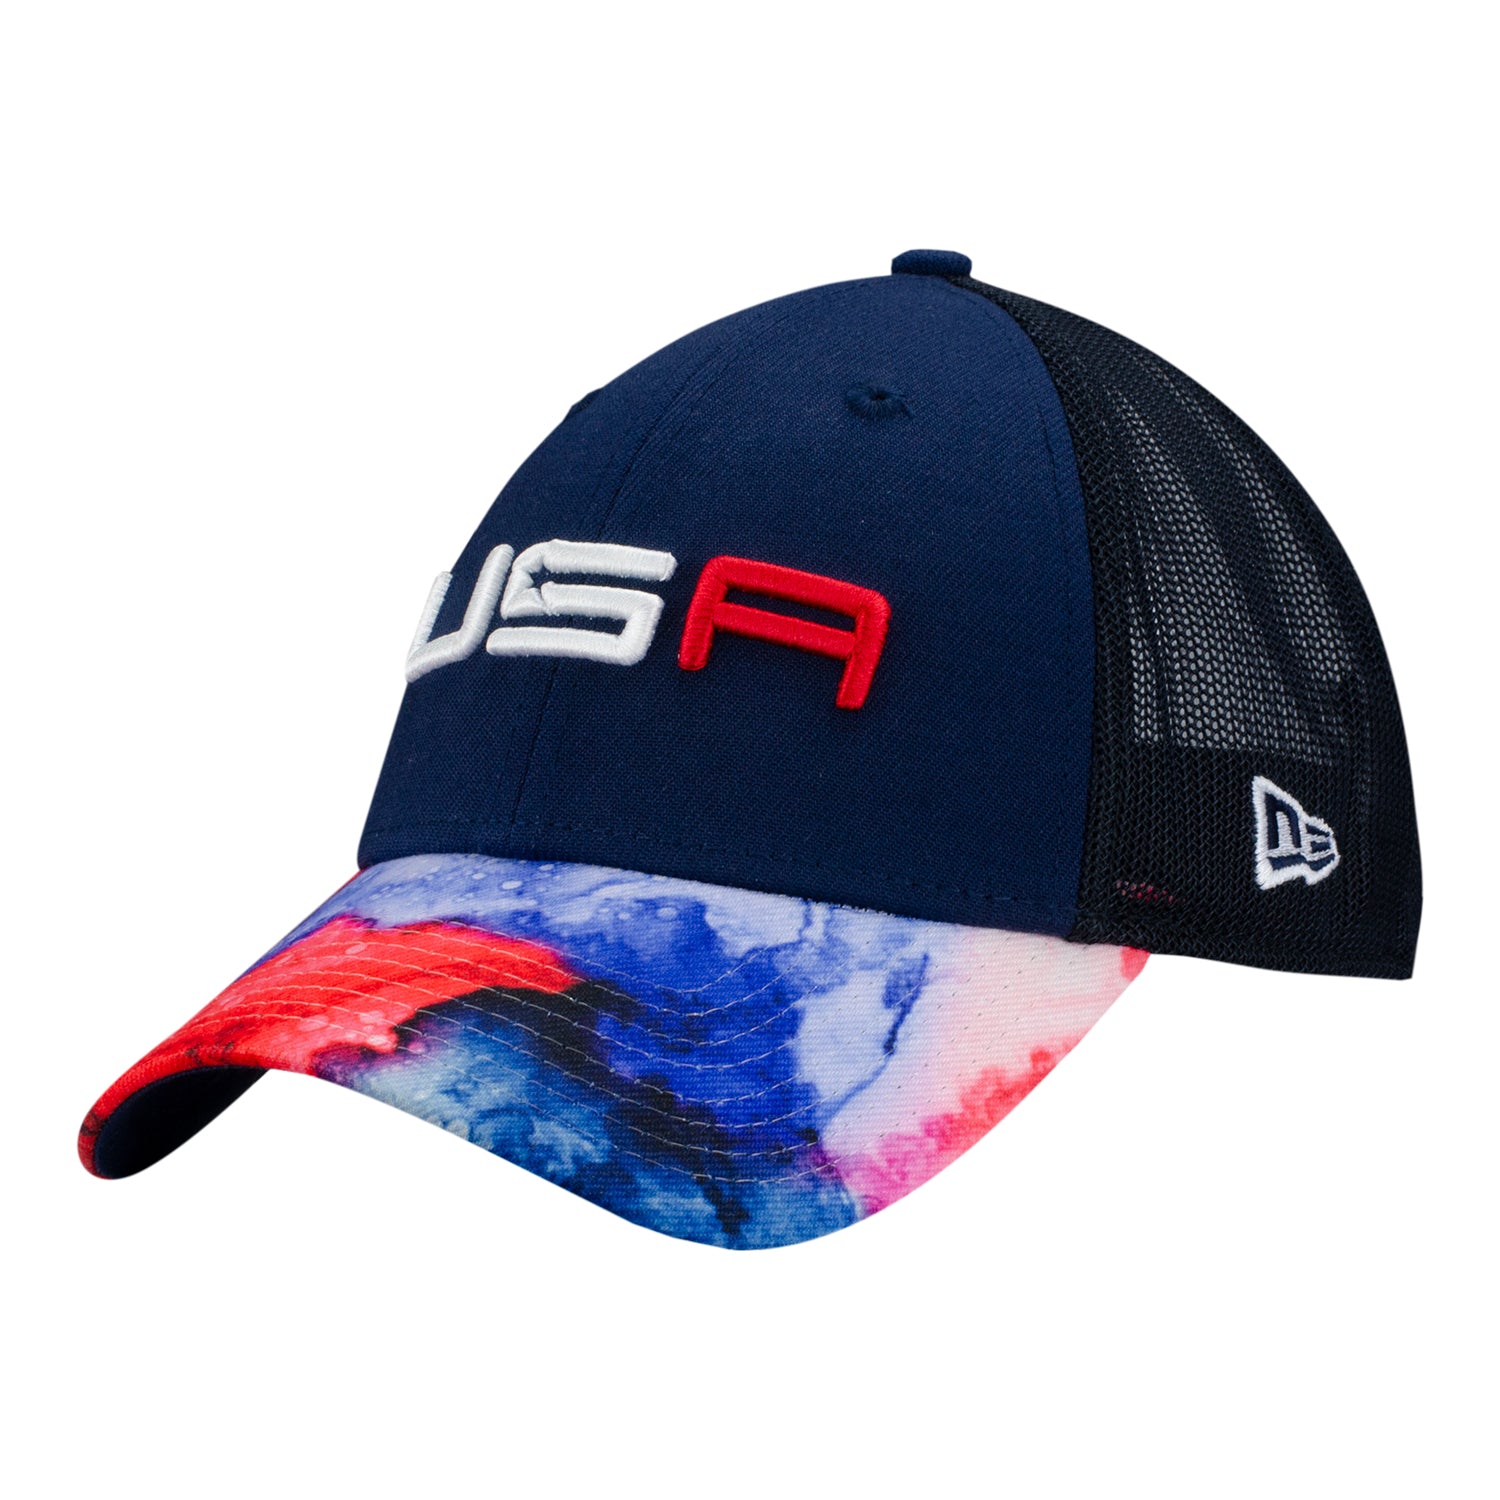 2023 Ryder Cup Welcome to The Team 9FORTY Stretch Snap Hat, Blue, by New Era